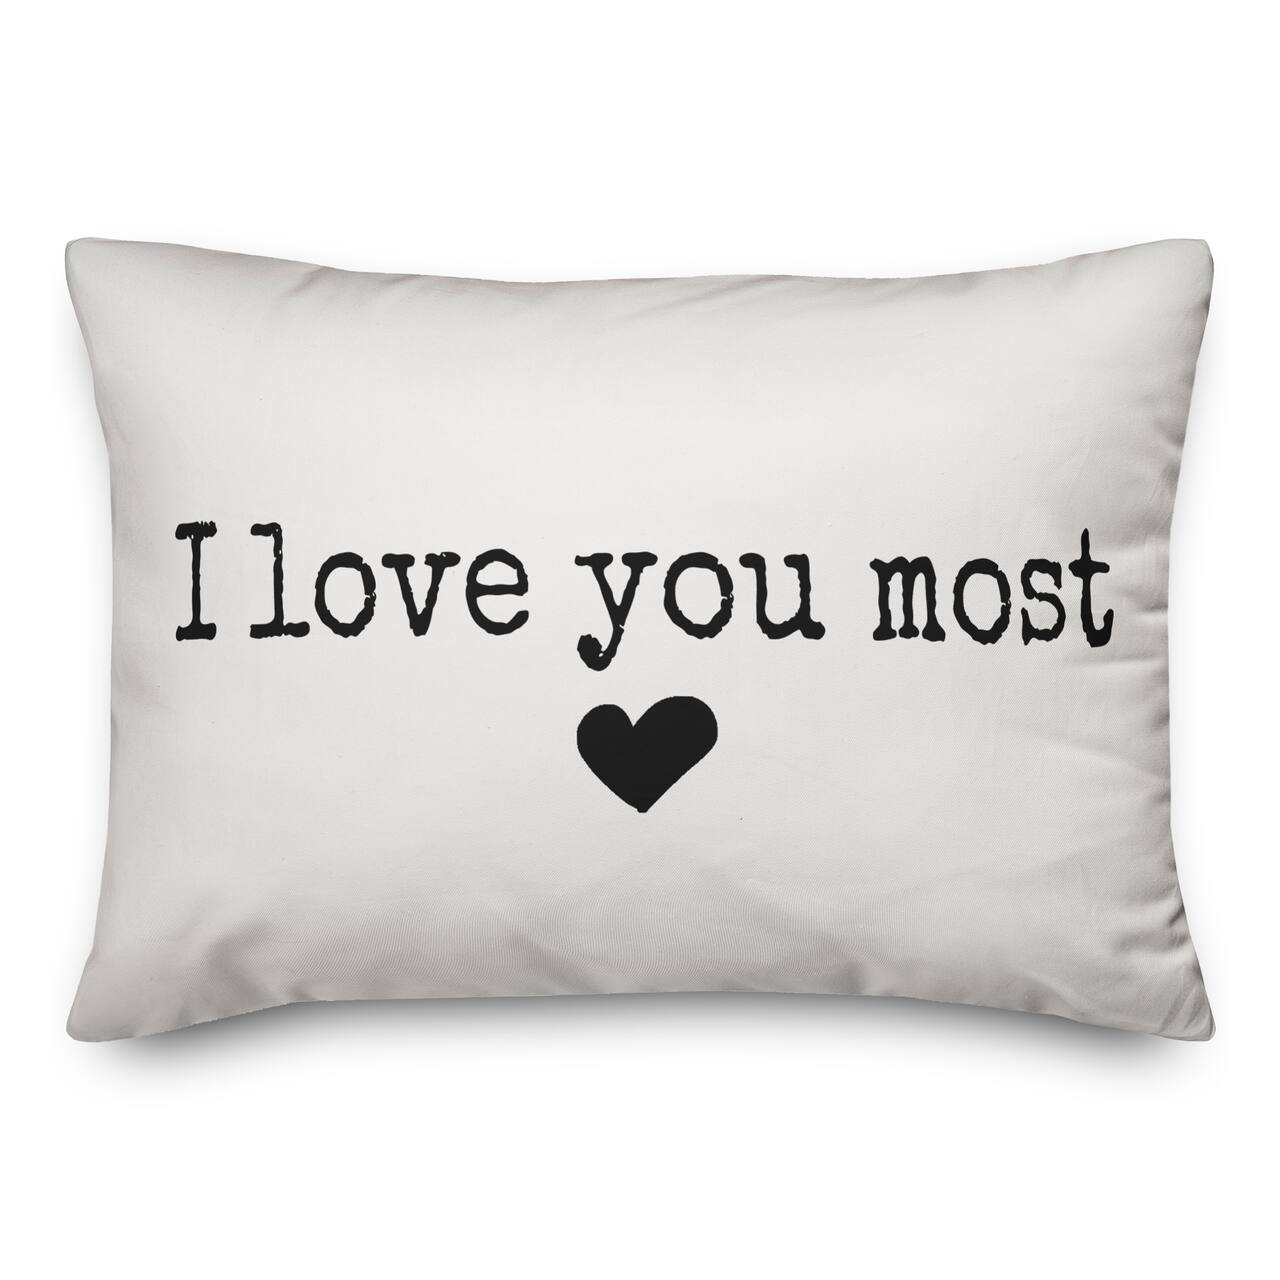 I Love You Most Throw Pillow